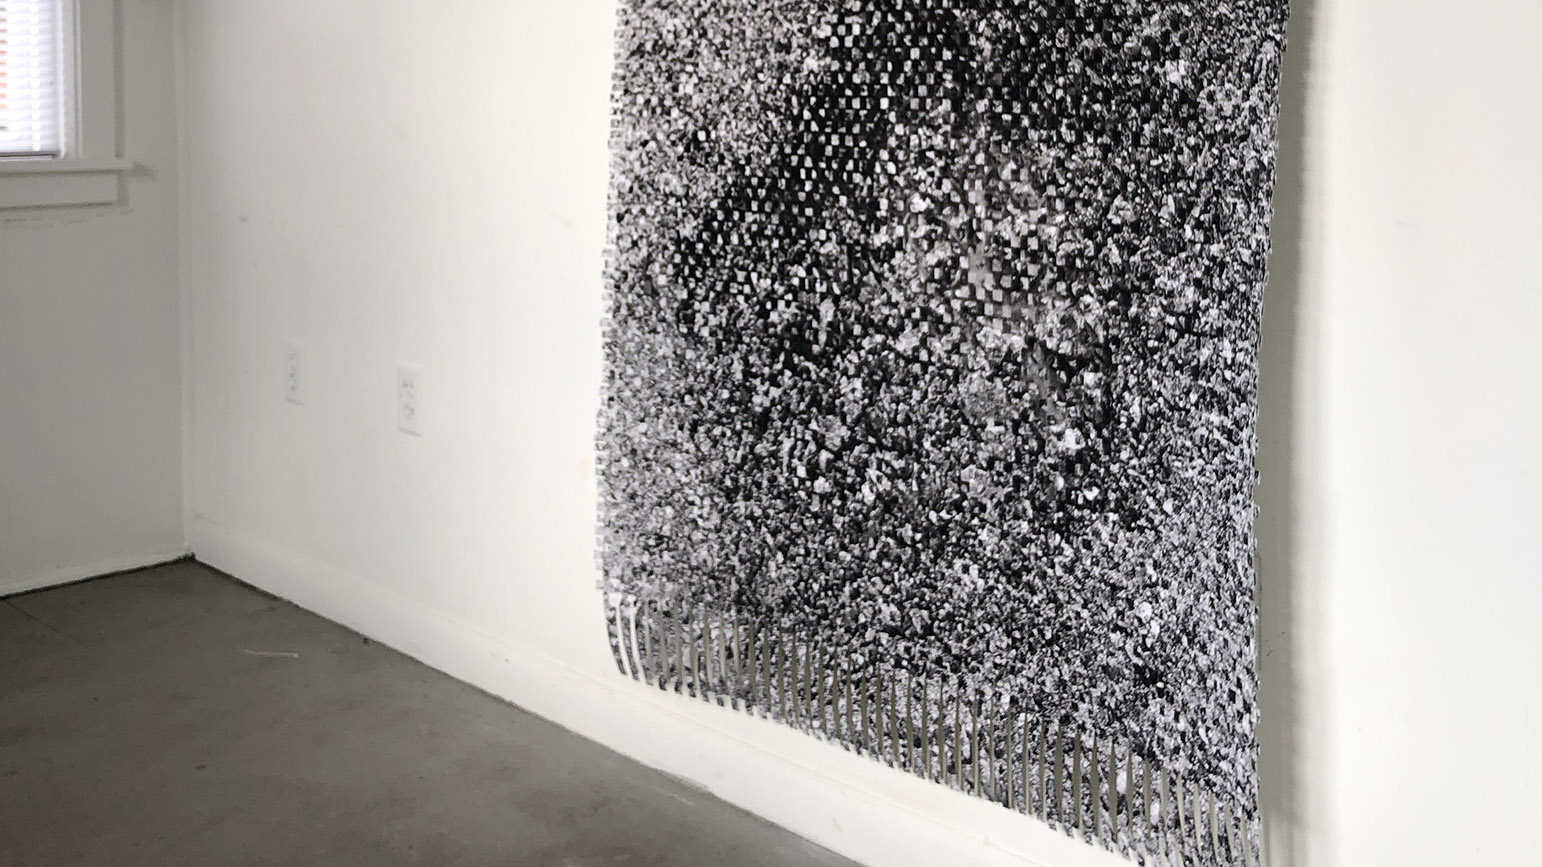 Photograph of a paper weaving of road texture installed in a gallery